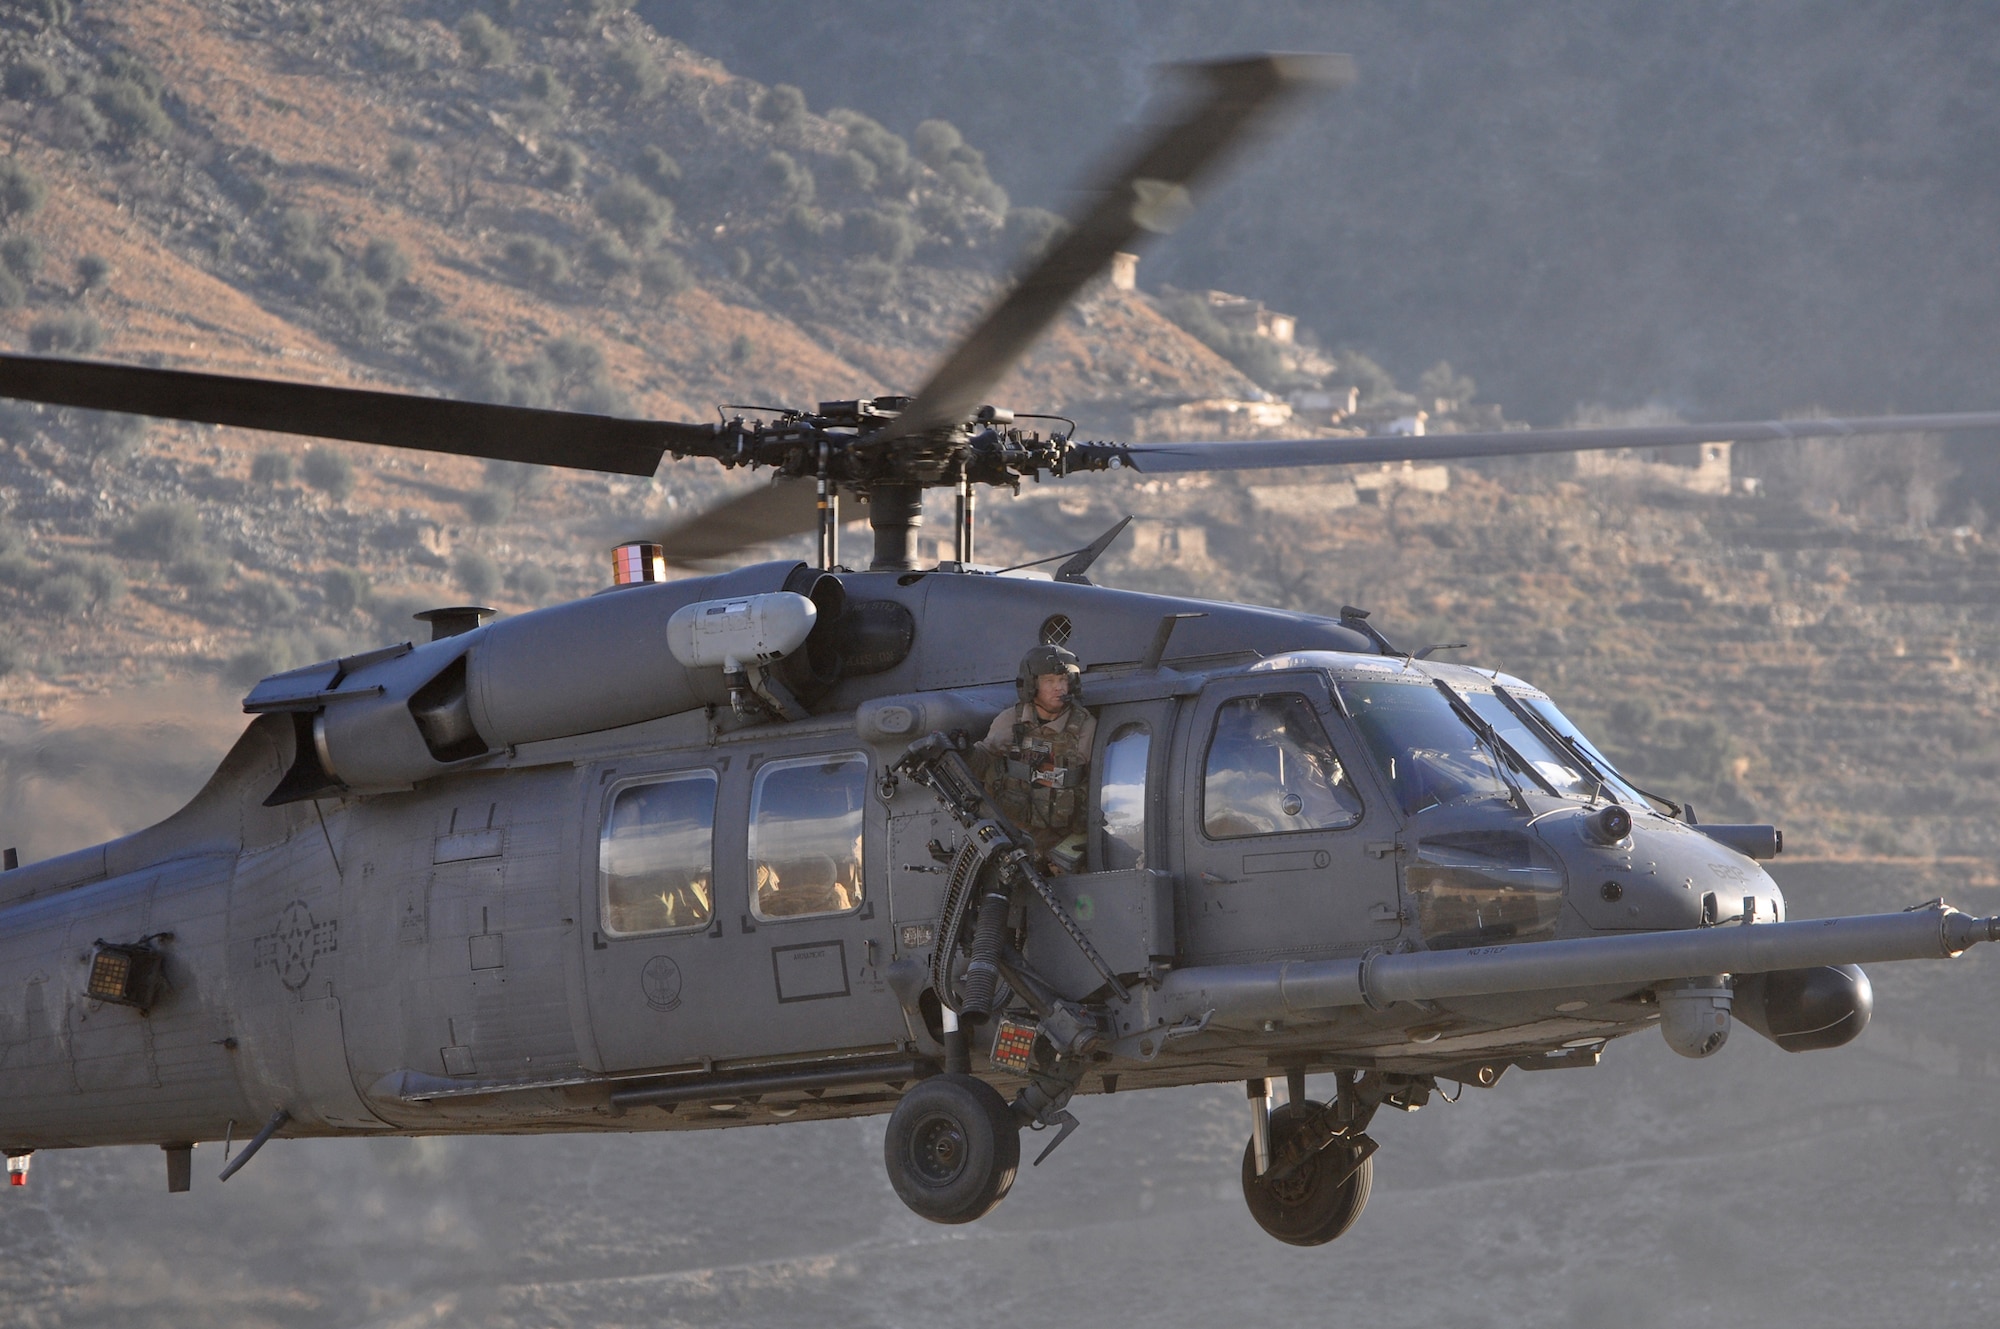 An HH-60G Pave Hawk assigned to the 83rd Expeditionary Rescue Squadron at Bagram Airfield, Afghanistan, arrives at a remote forward operating base in Afghanistan's Kunar province. The squadron members occasionally reposition personnel and aircraft to FOBs to provide casualty evacuation support to planned ground operations. (U.S. Air Force photo/Capt. Erick Saks)